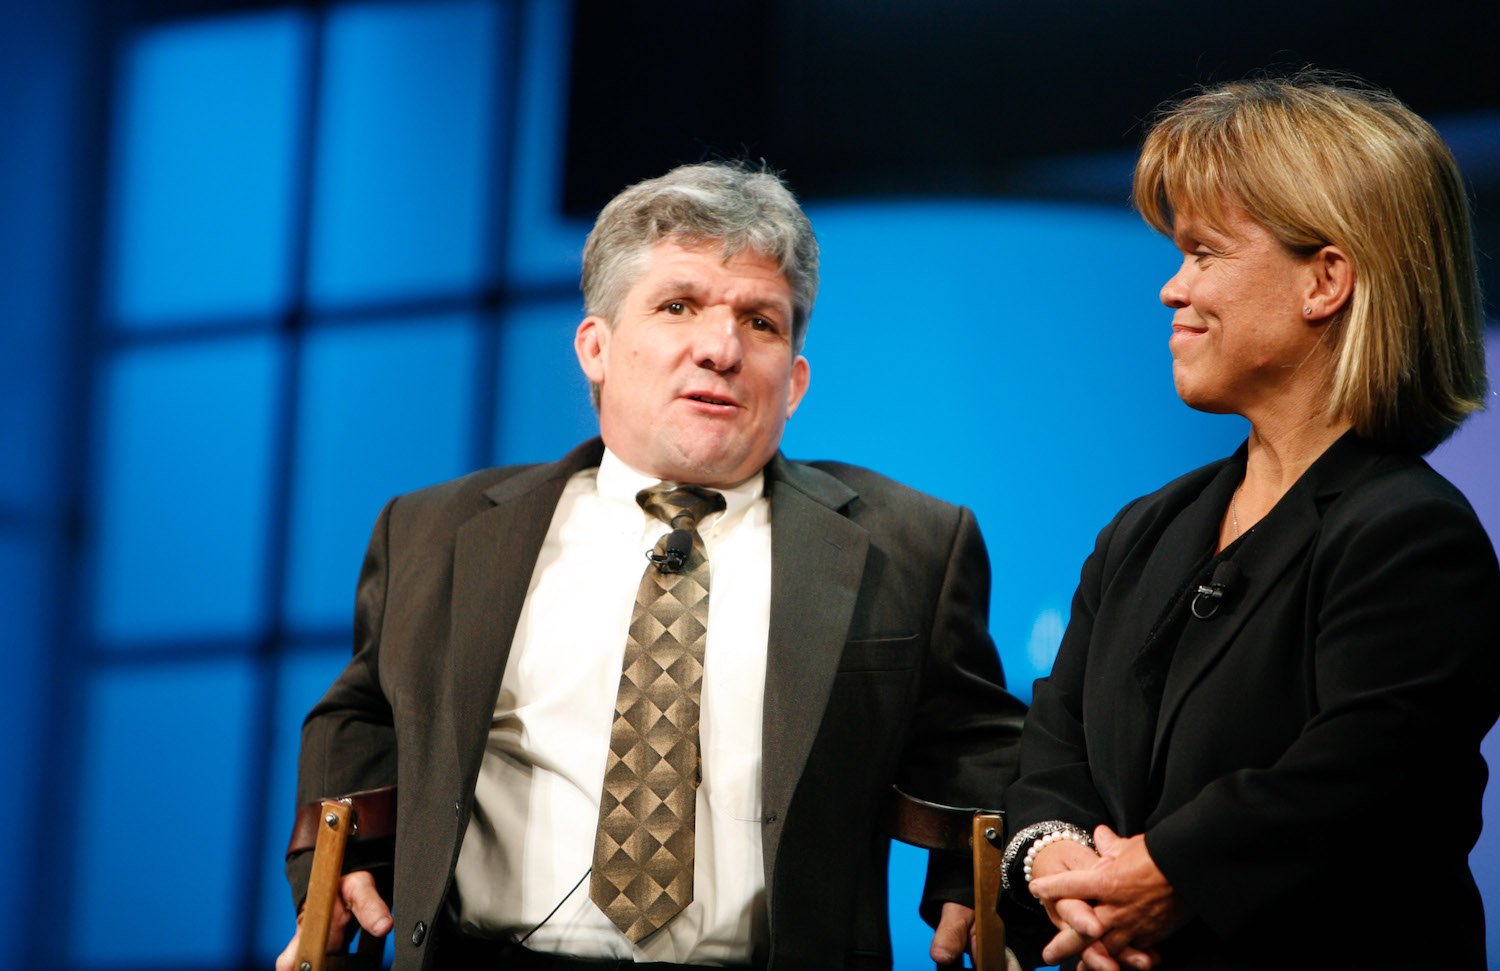 Matt Roloff and Amy Roloff from 'Little People, Big World' against a blue background